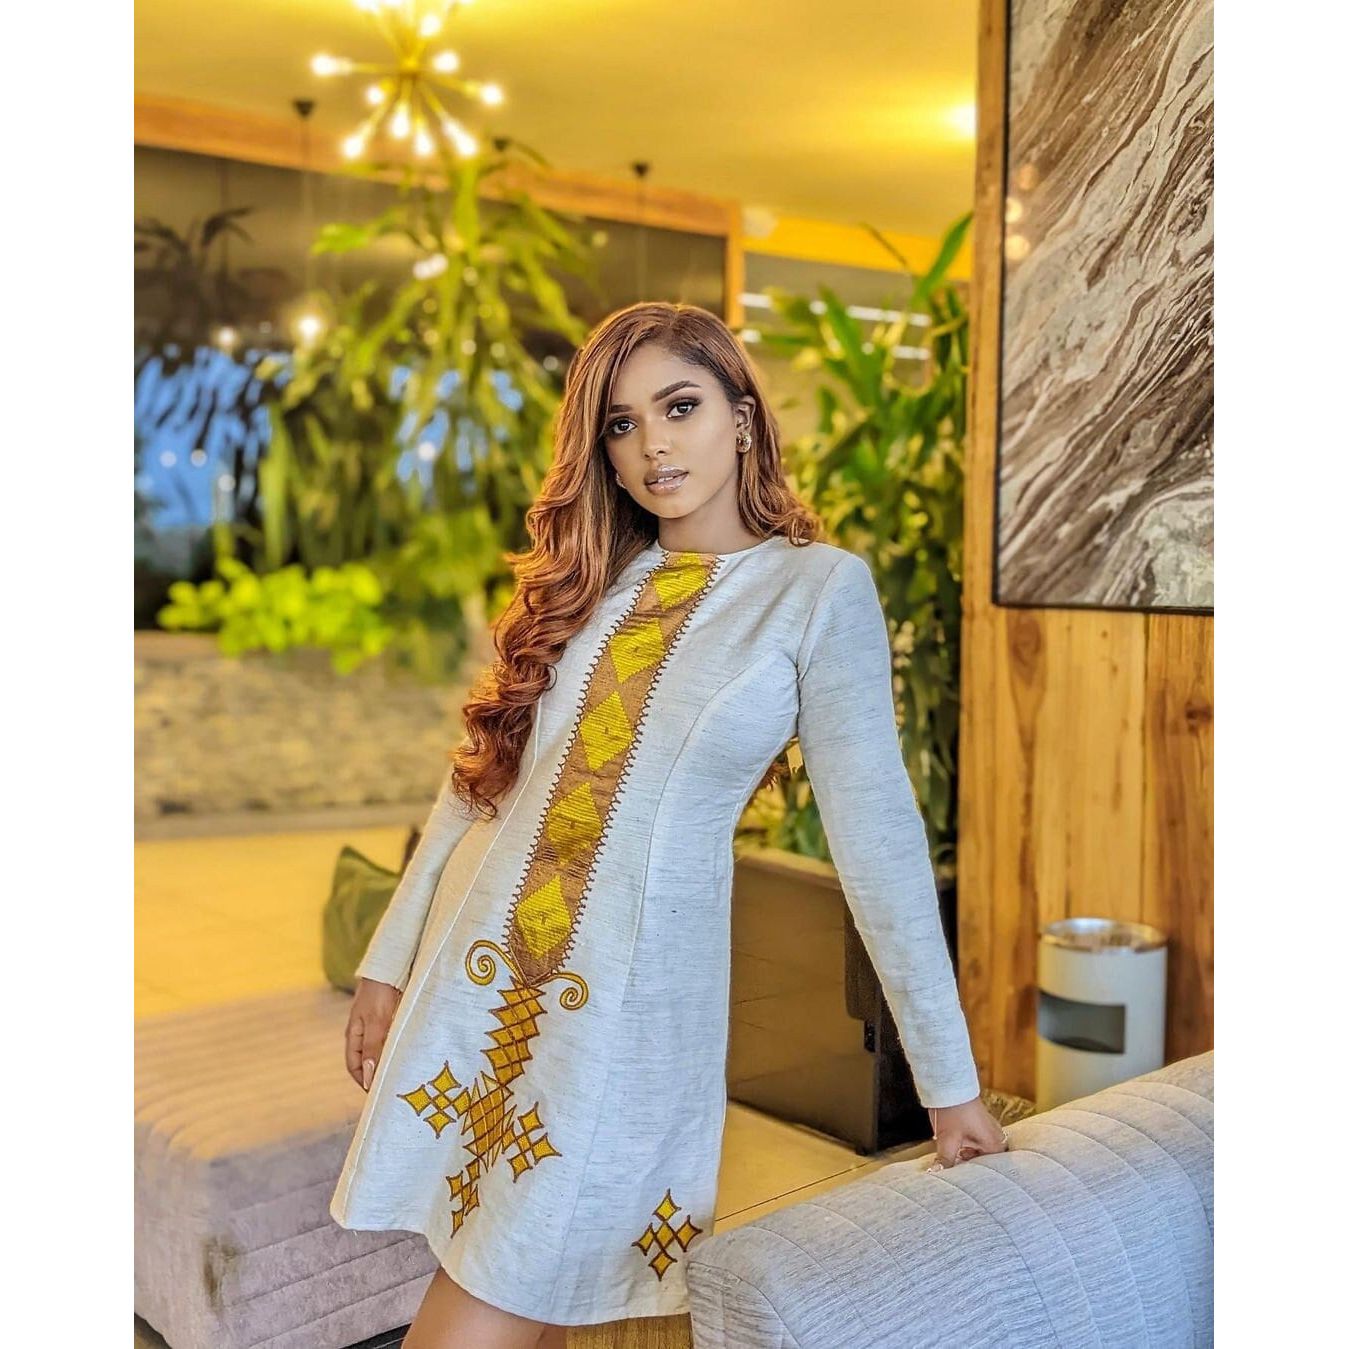 Gorgeous Short Habesha Kemis with Intricate Tilf Design and Luxurious Fetil Material , Simple Habesha Dress, Summer Dress, Vacation, ሀበሻ